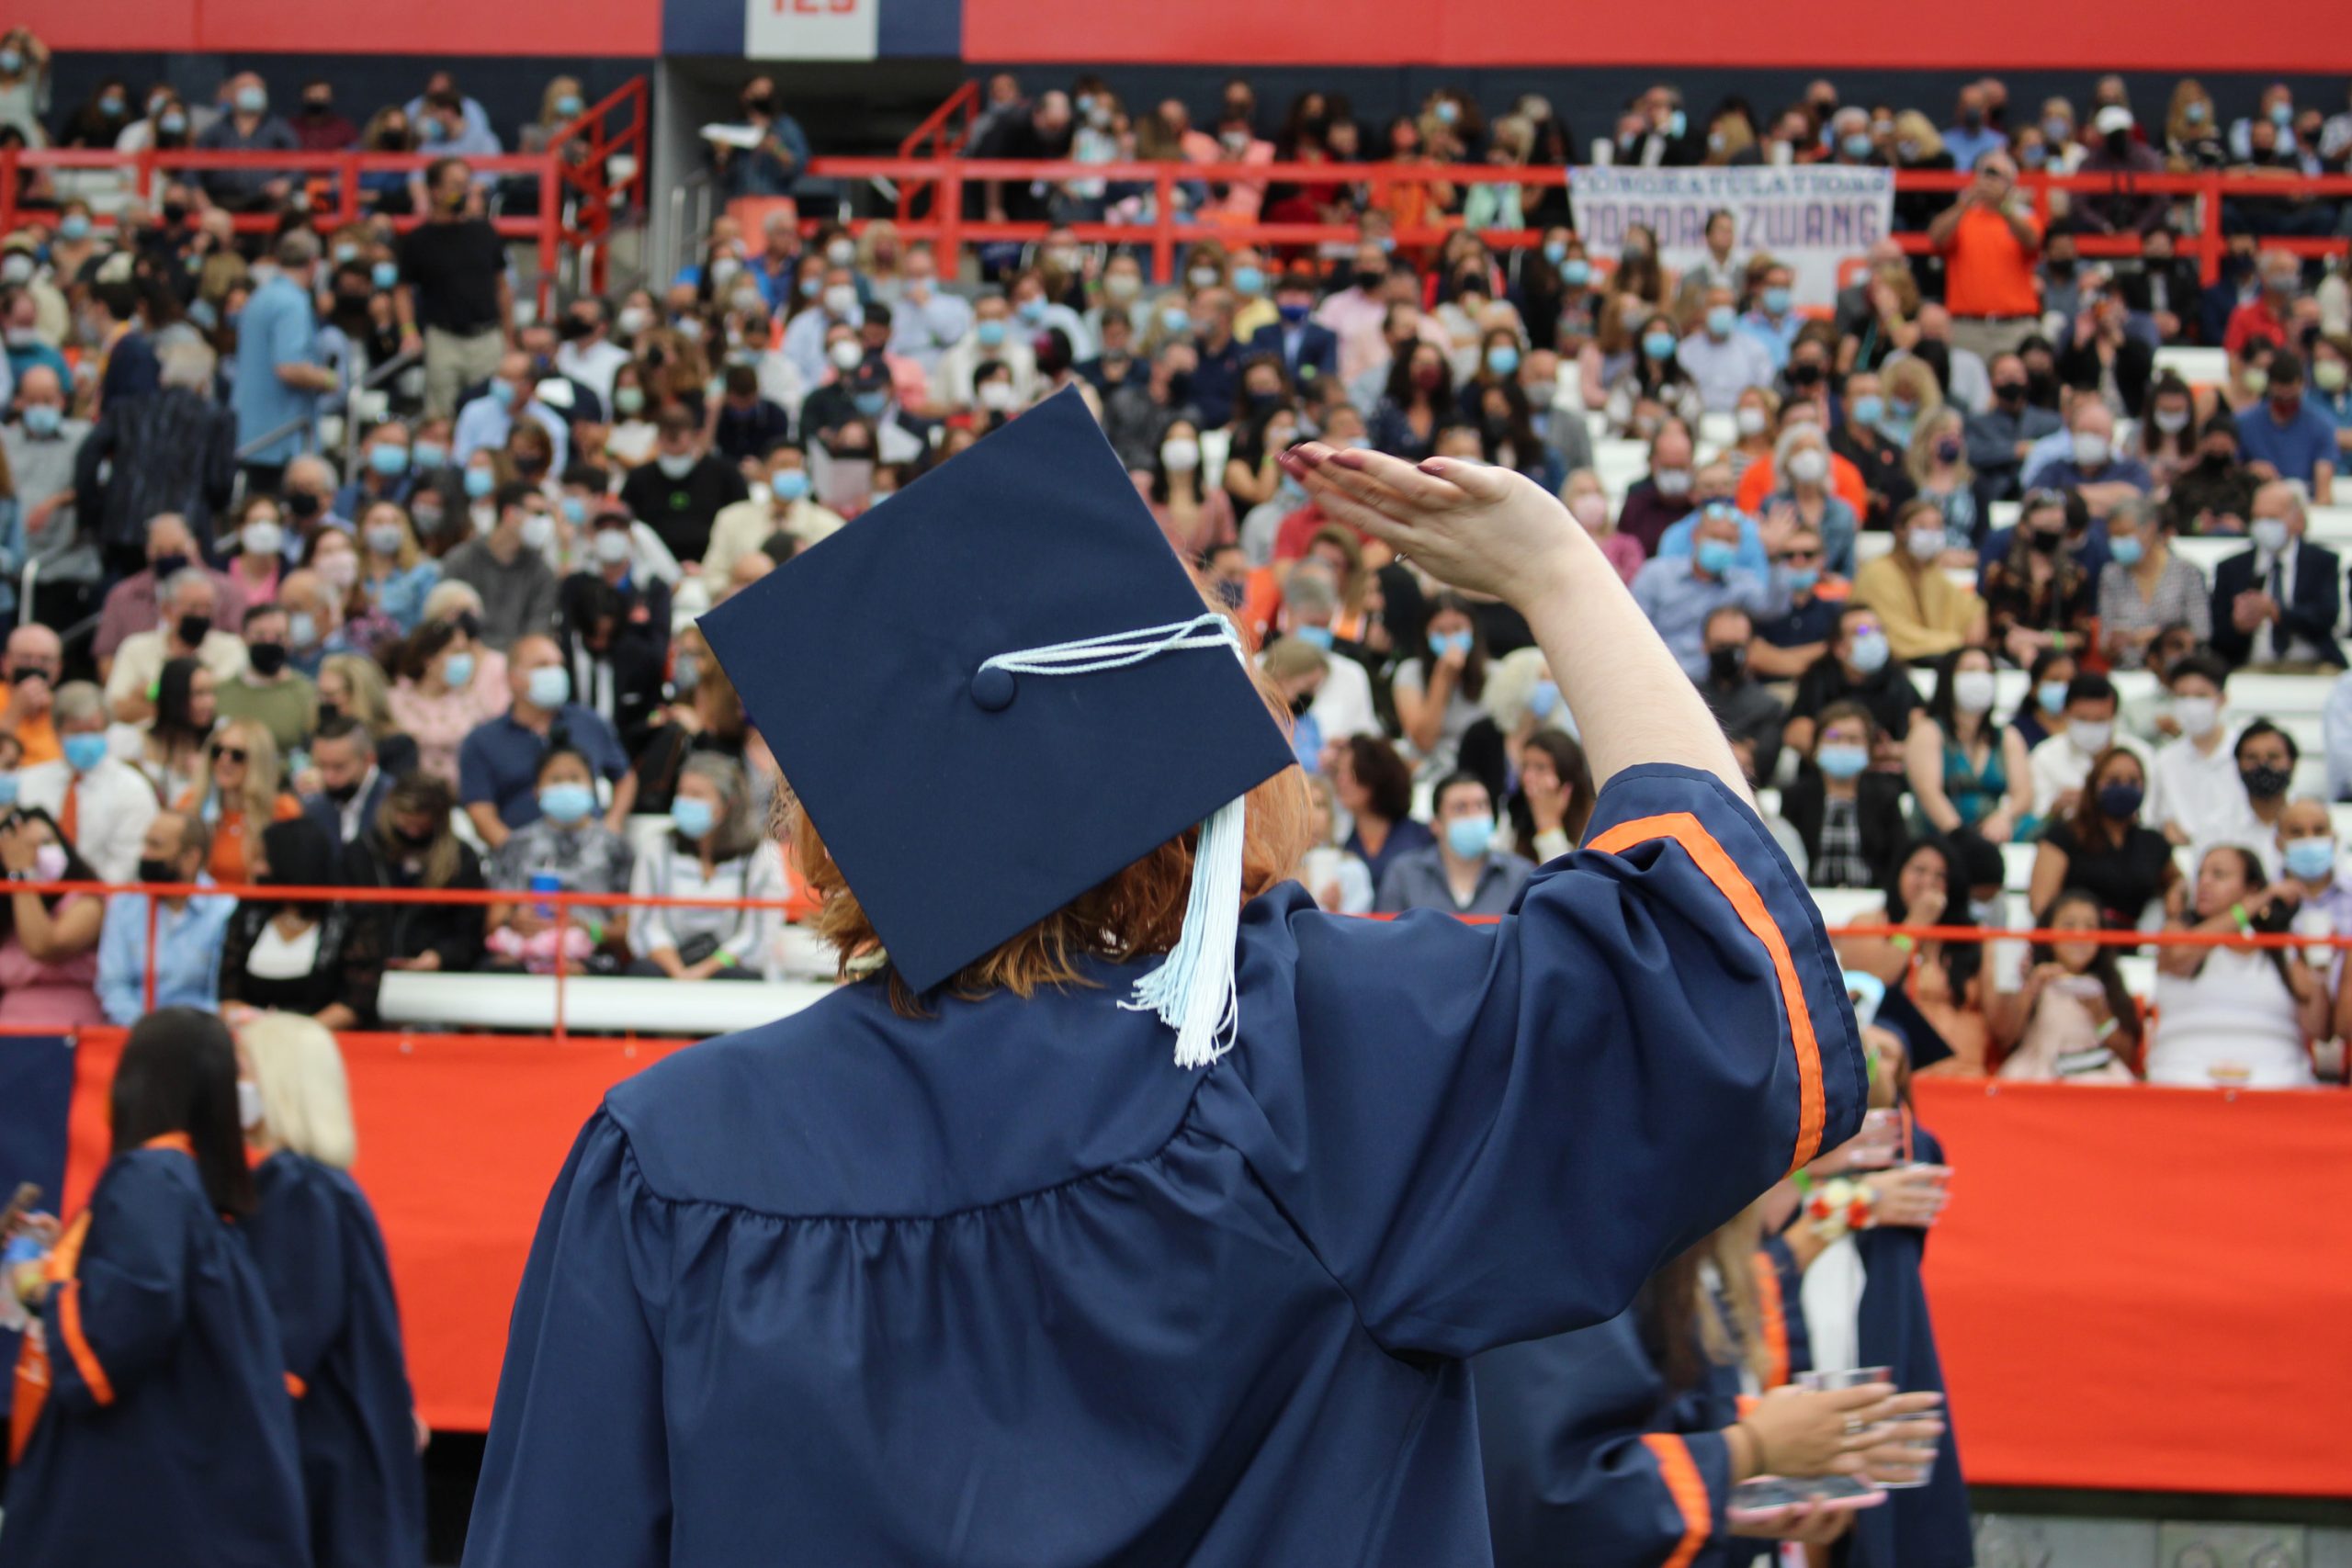 A 2020 SU graduate waves before the September 19, 2021 Commencement ceremony in the Dome on September 17th, 2021.